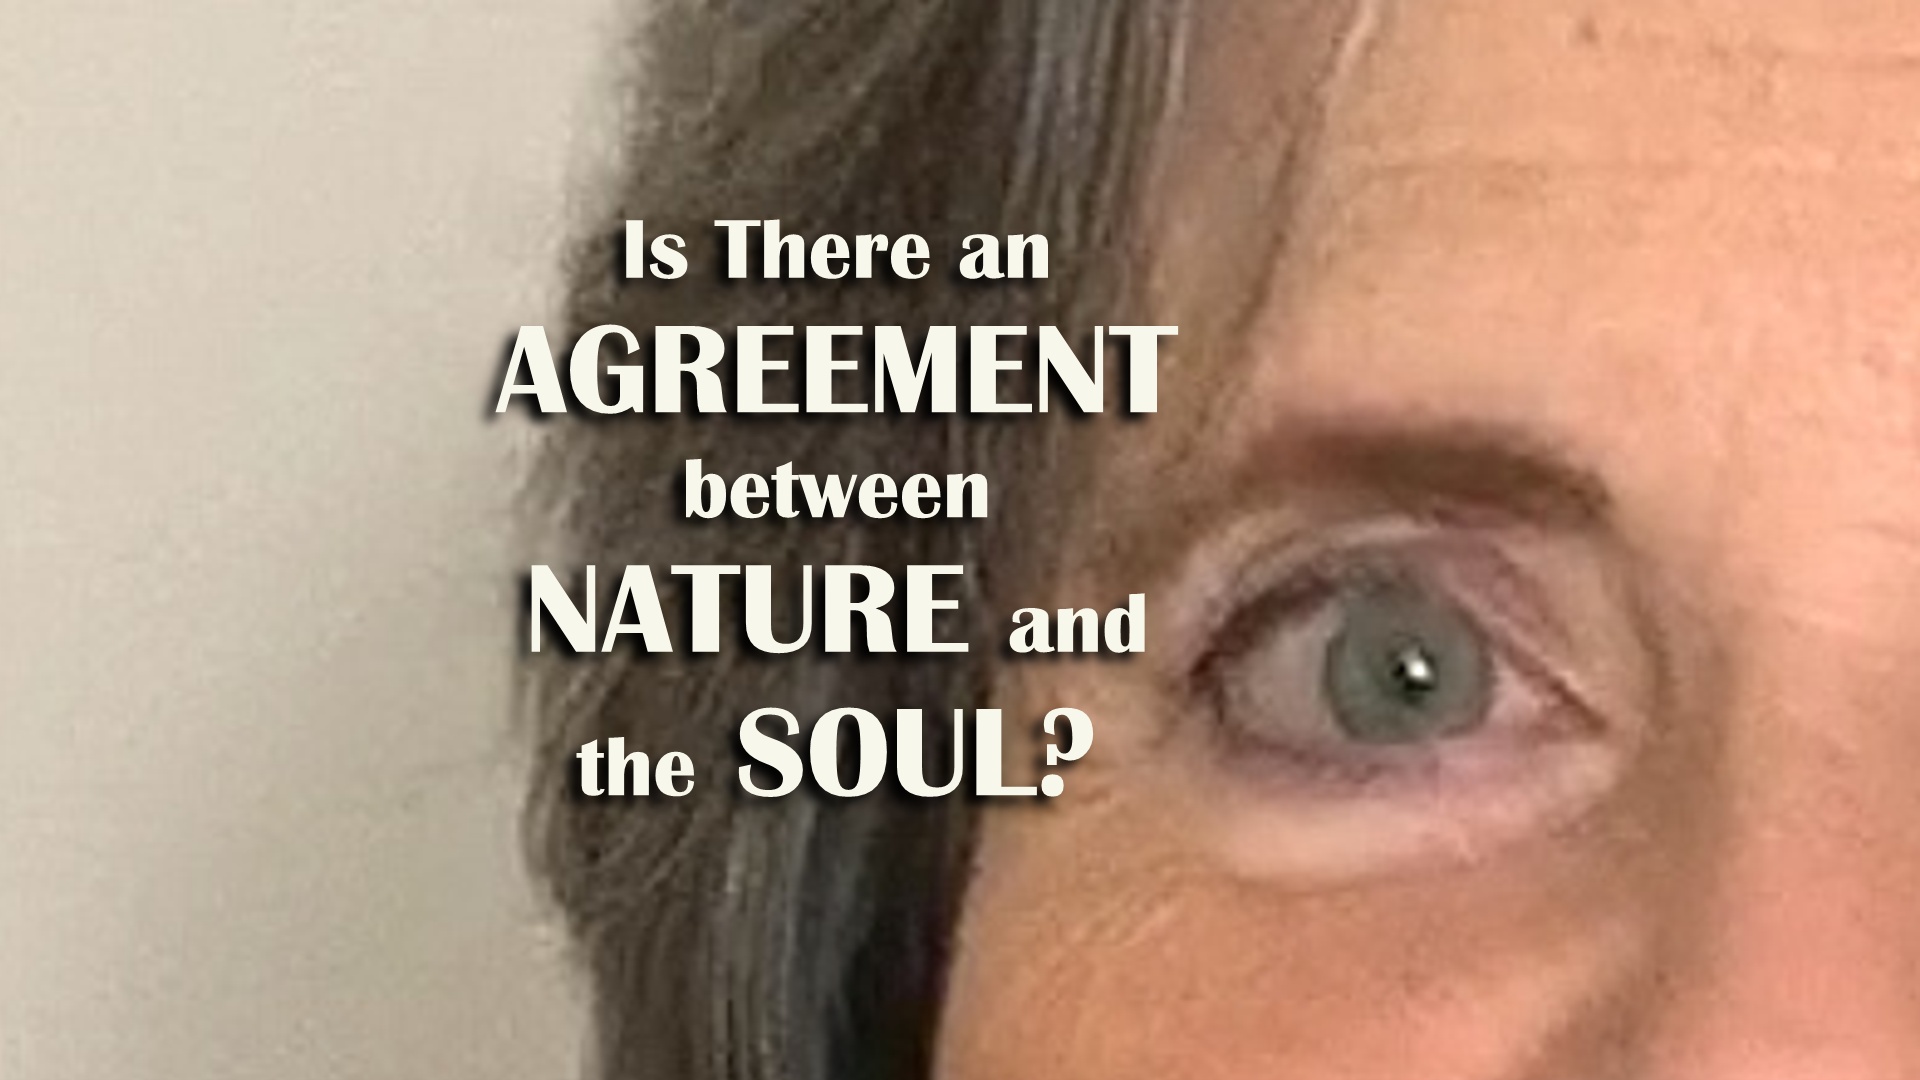 is there an agreement between nature and the soul